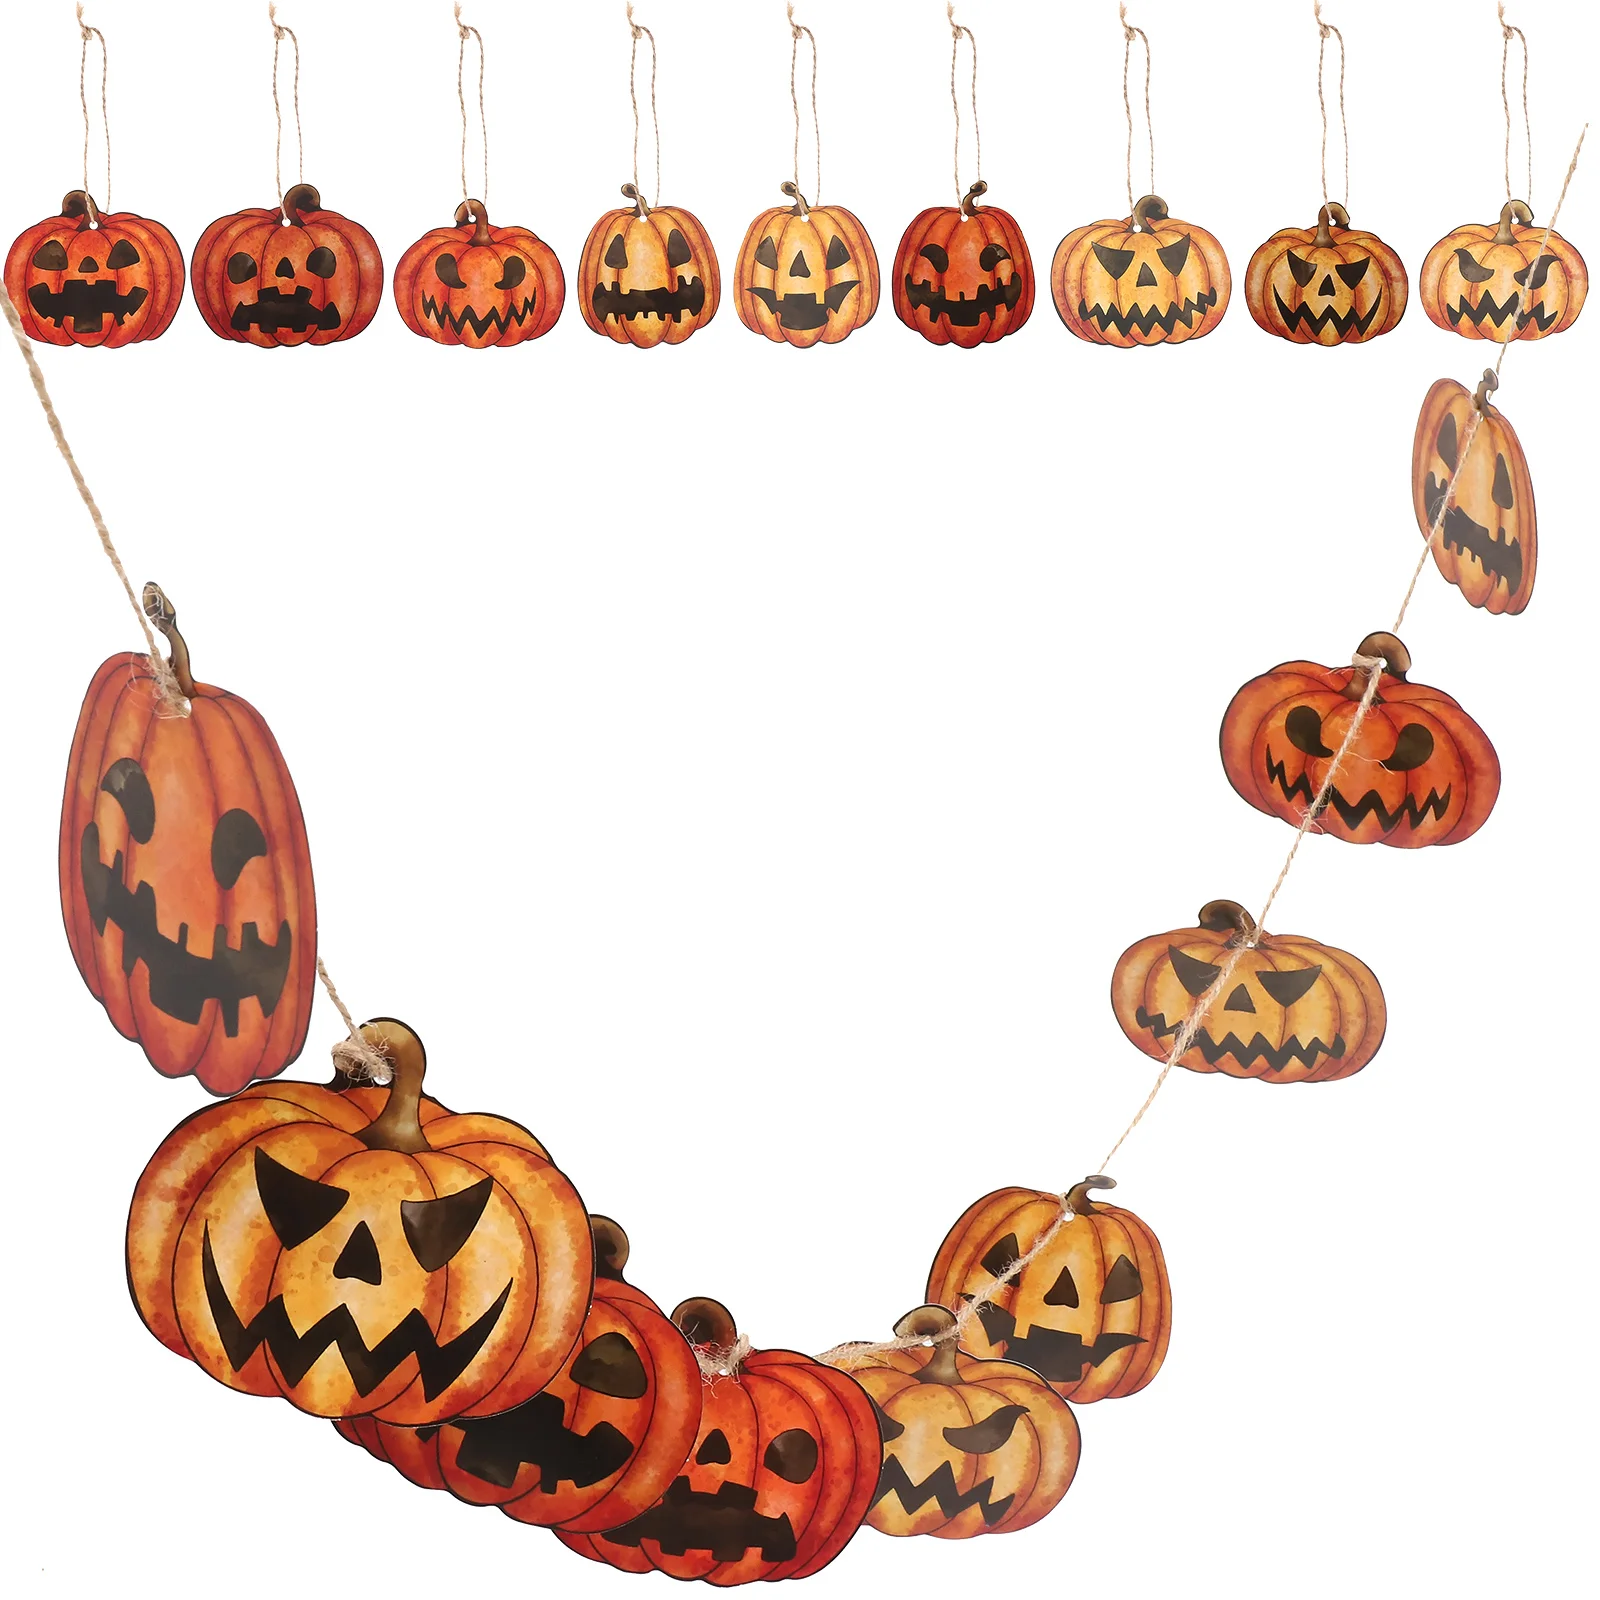 

36 Pcs Paper Label Halloween Decorations Lovely Gift Tags Hanging Pumpkin Shaped Pendants Festival Theme Design Signs